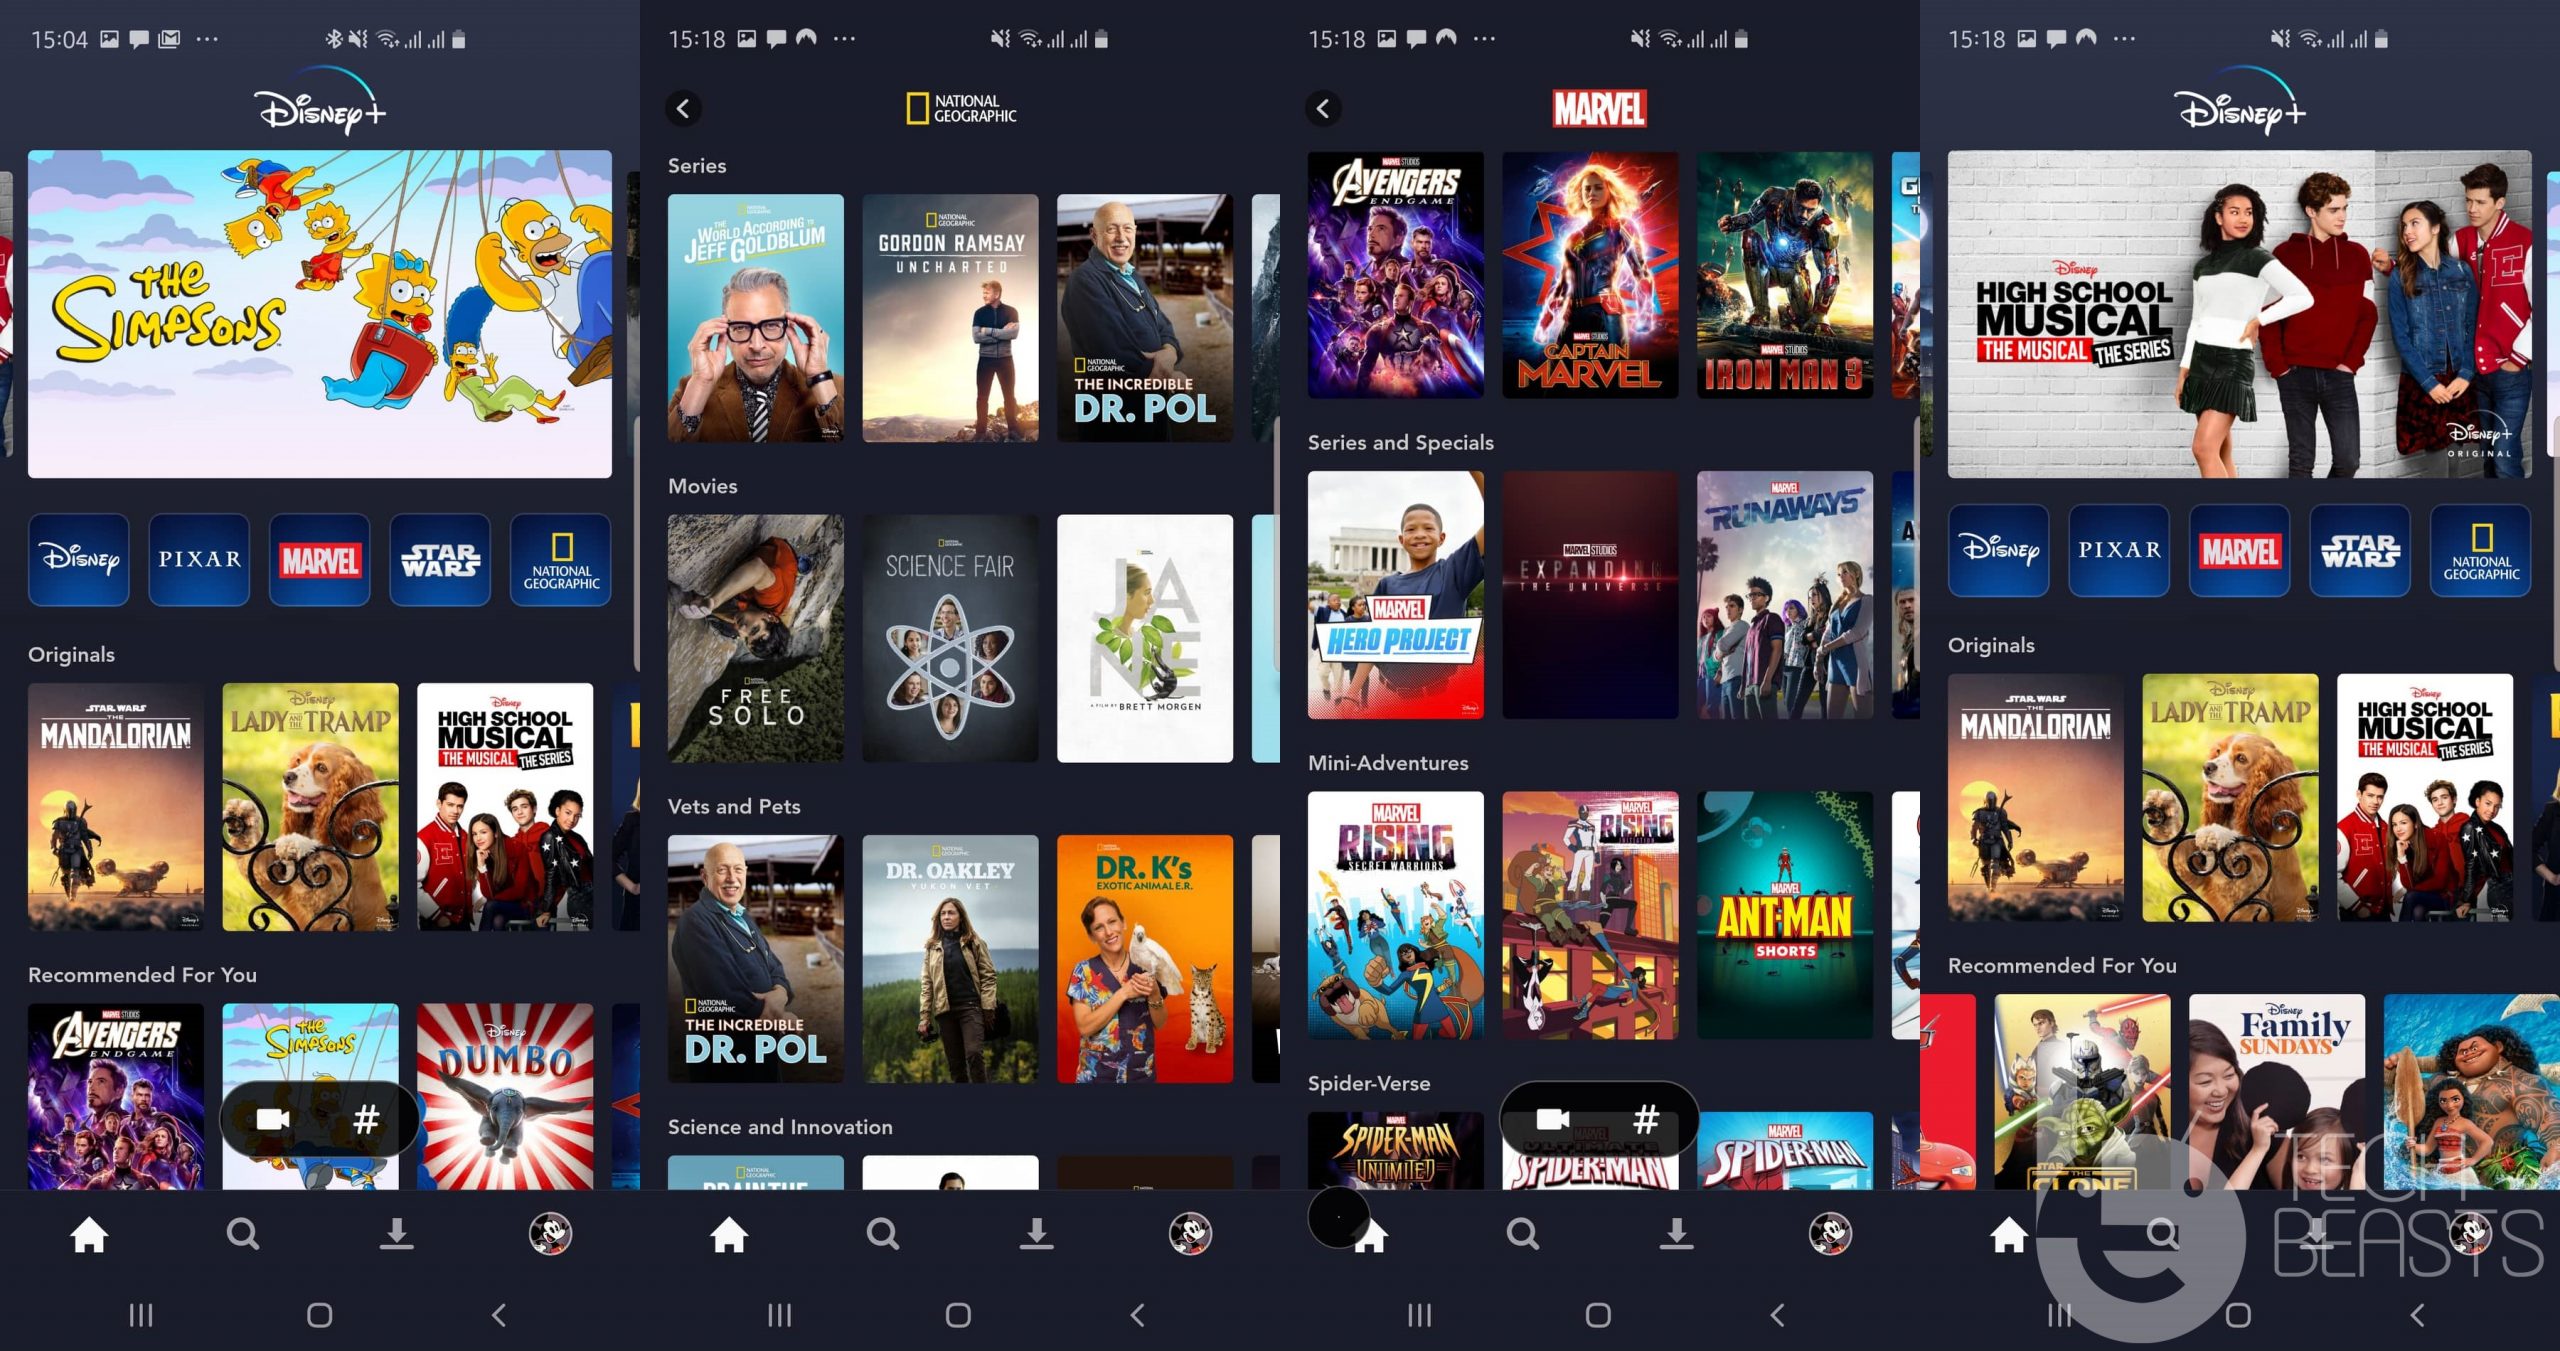 Download Disney+ for PC on Windows 10 and mac TechBeasts